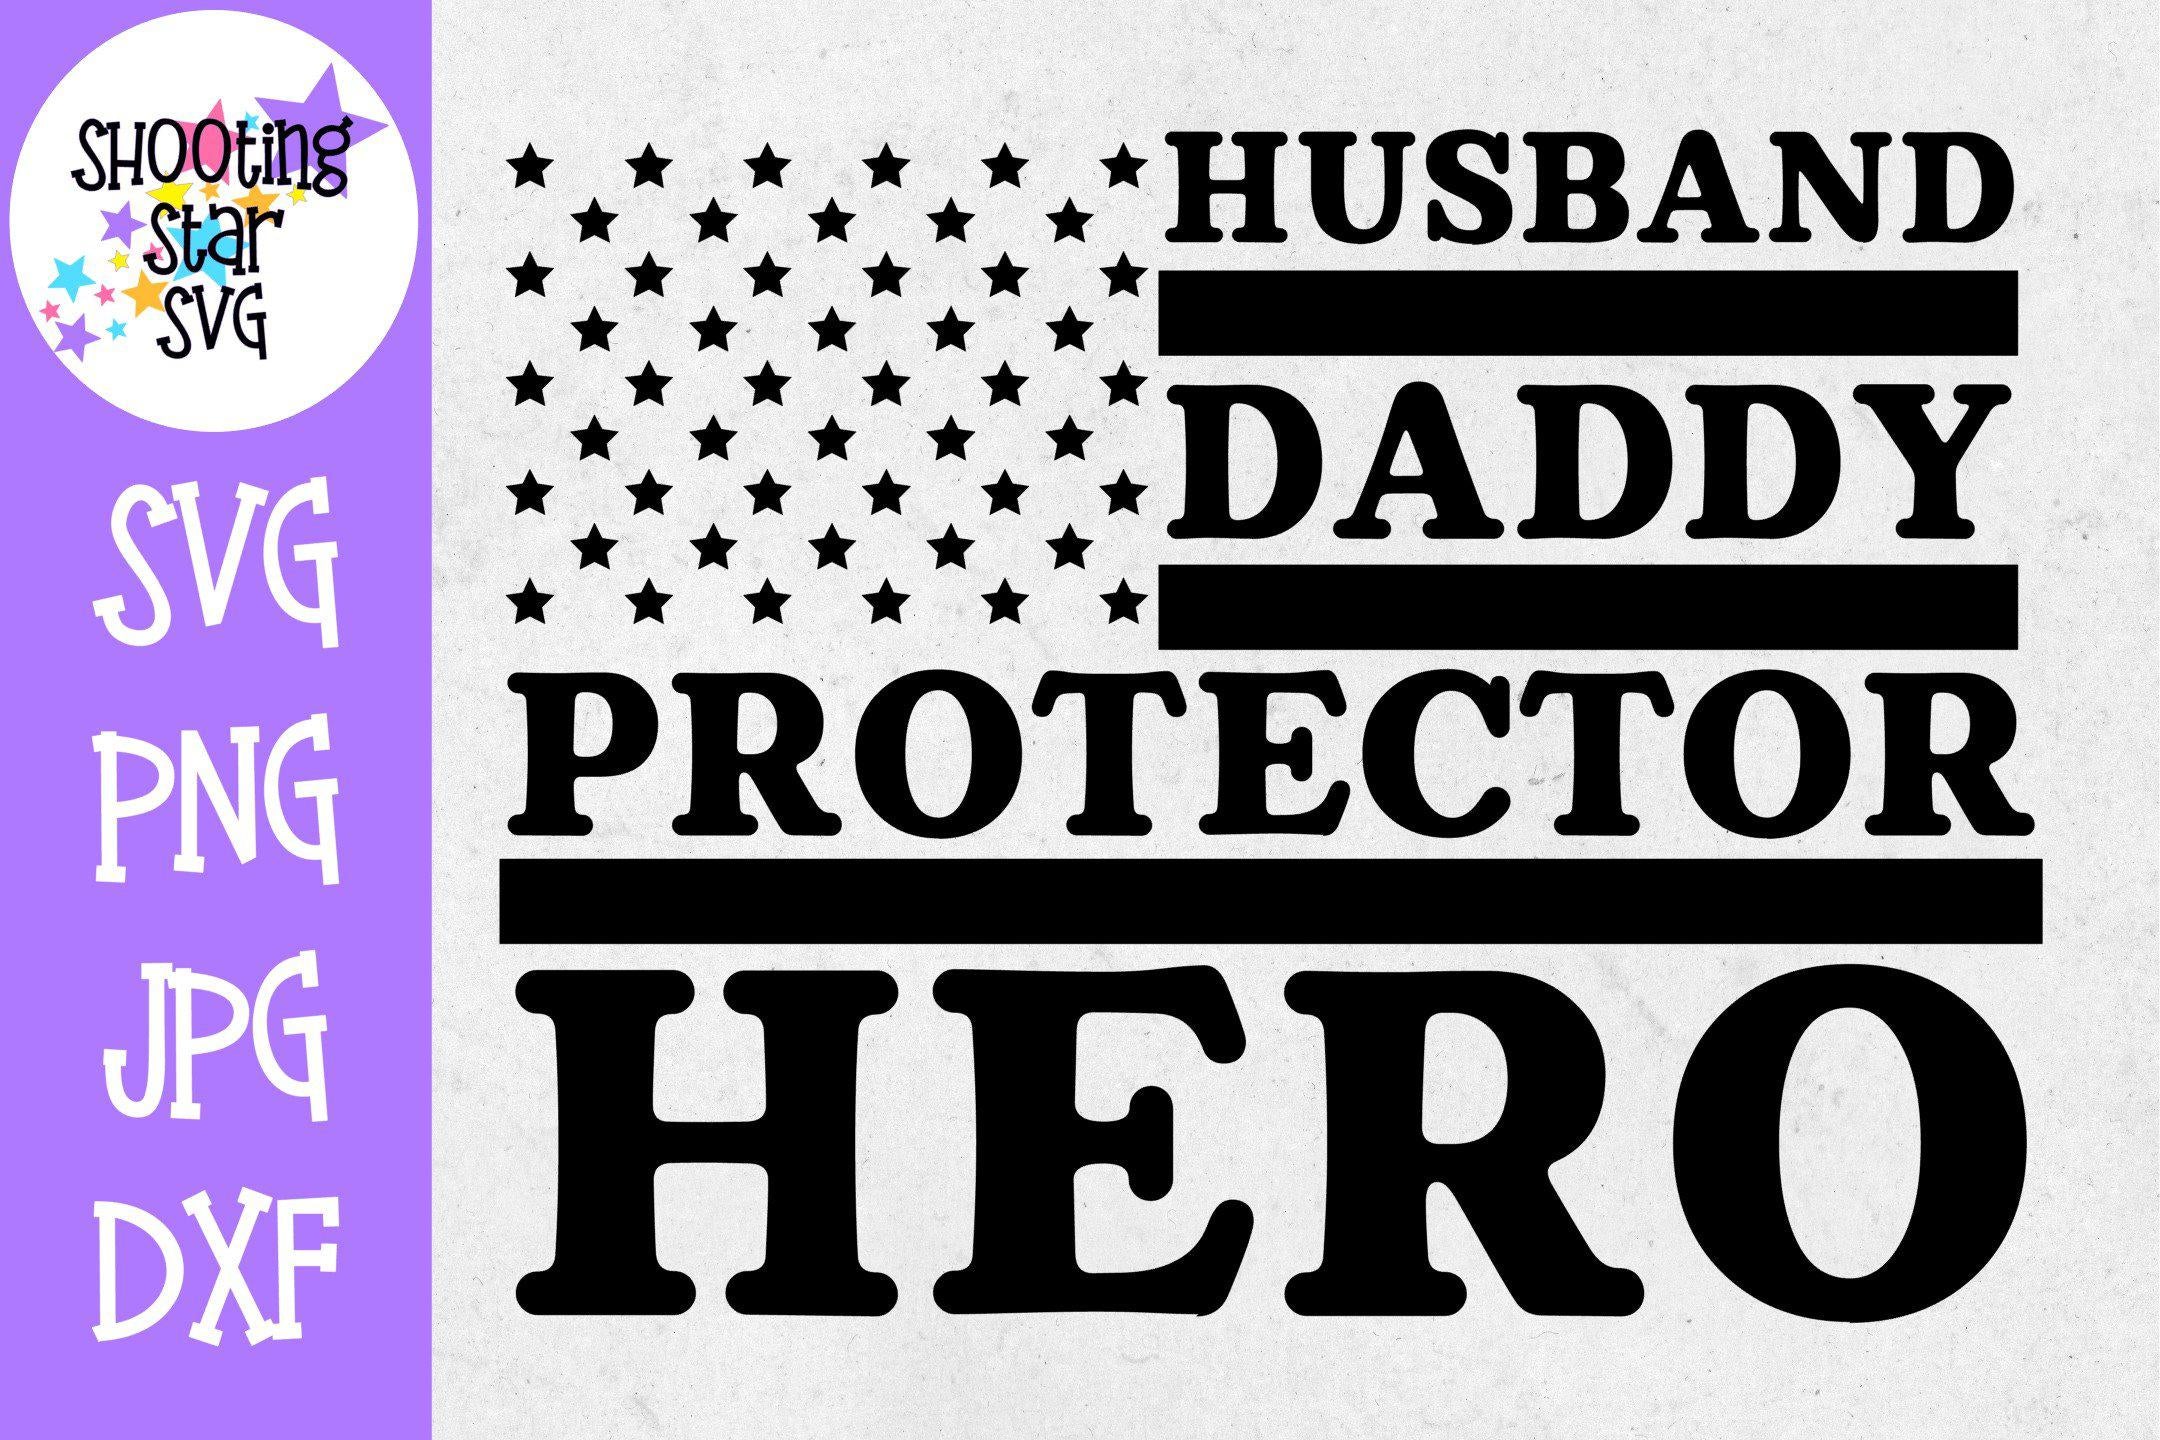 Husband Daddy Protector Hero -Veteran's and Father's Day SVG